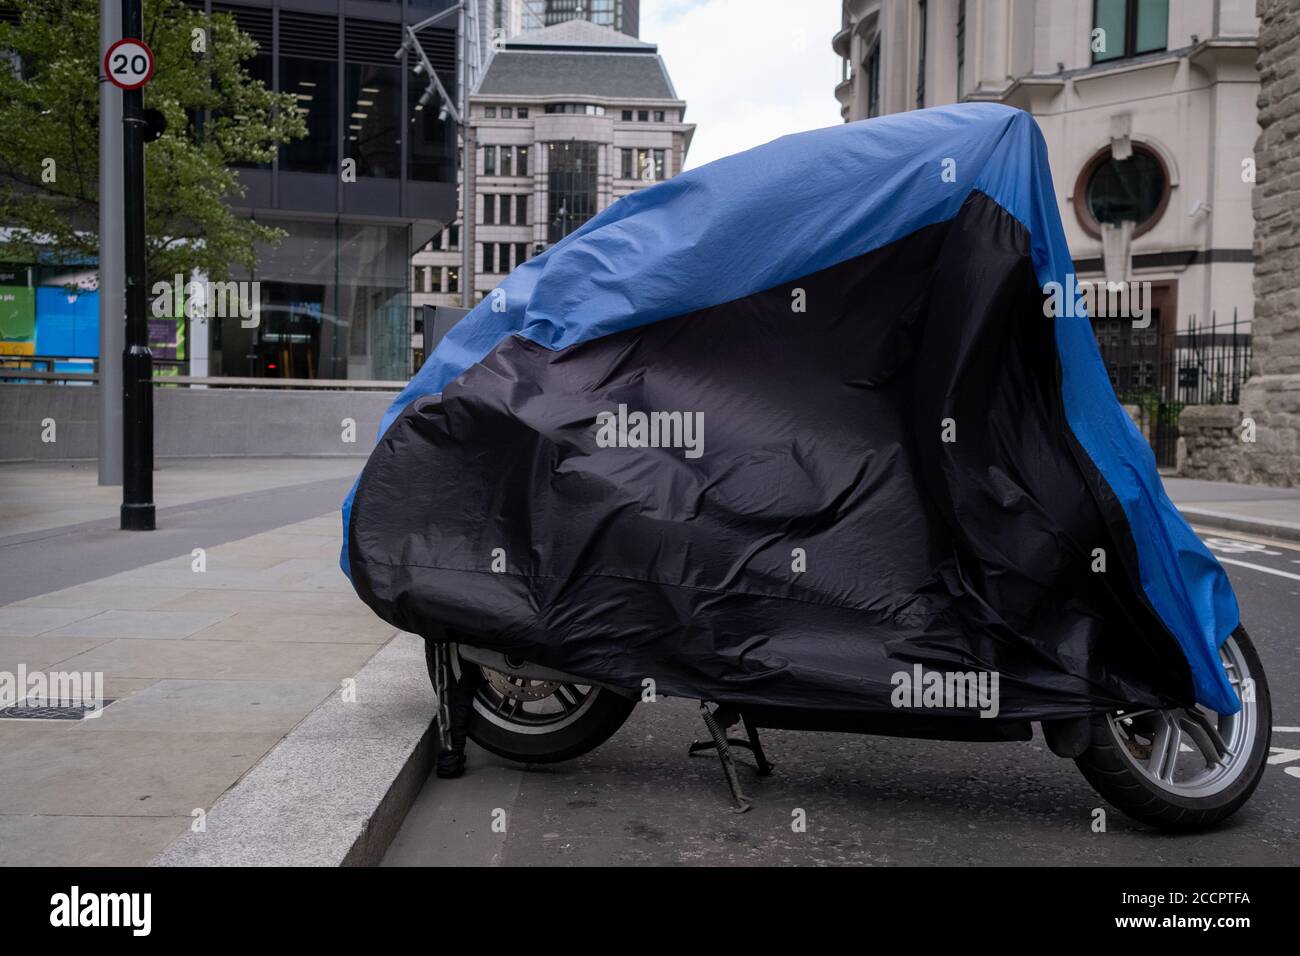 As Storm Ellen hits the capital, a motorbike's cover billows in strong winds as gusts reached the financial district, on 21st August 2020, in London, England. Stock Photo